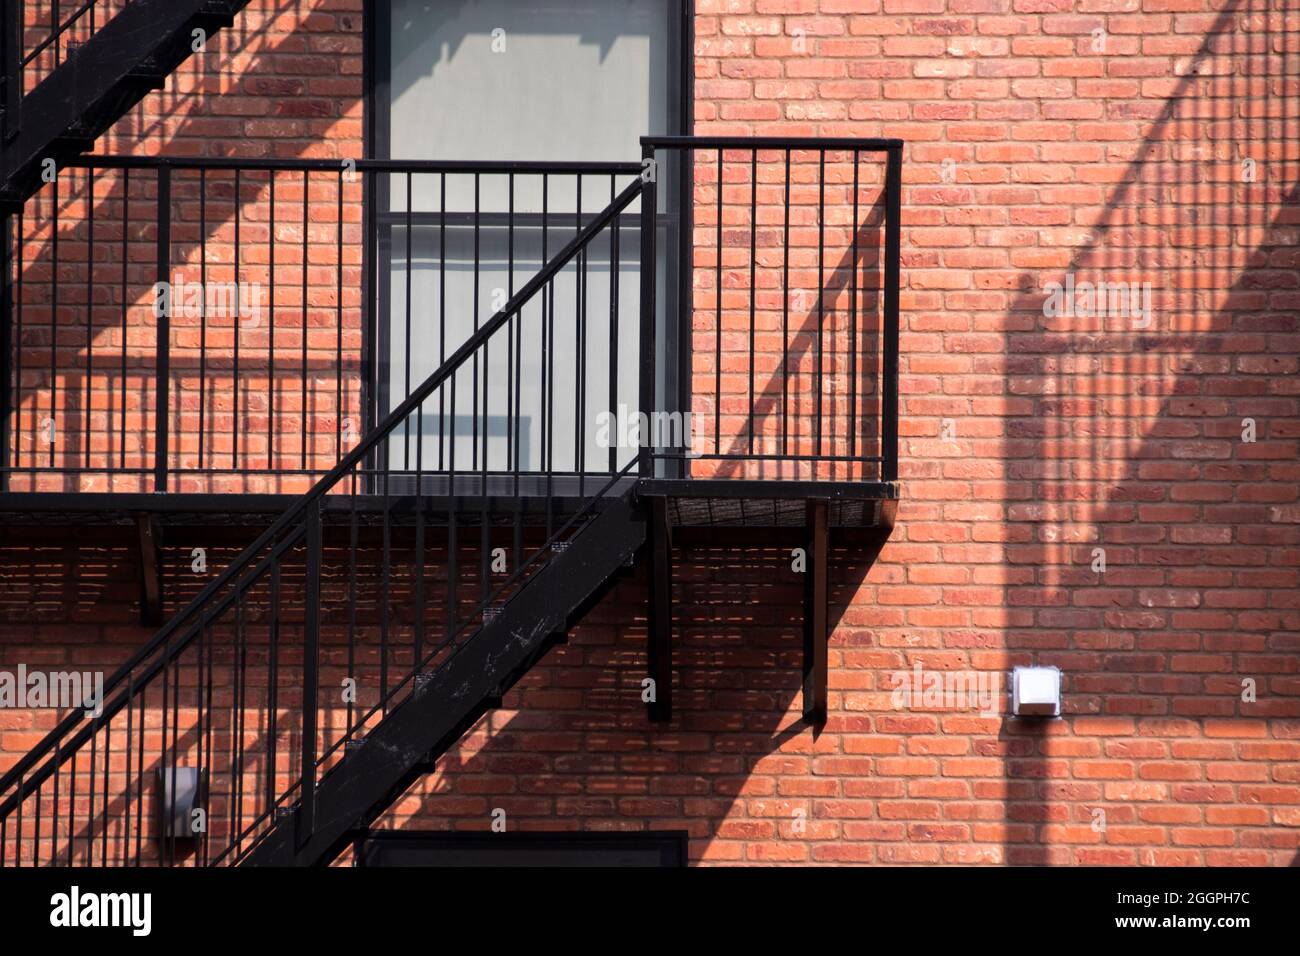 Steel fire escapes on the exterior of a brick apartment building in Hoboken, New Jersey, USA. Stock Photo